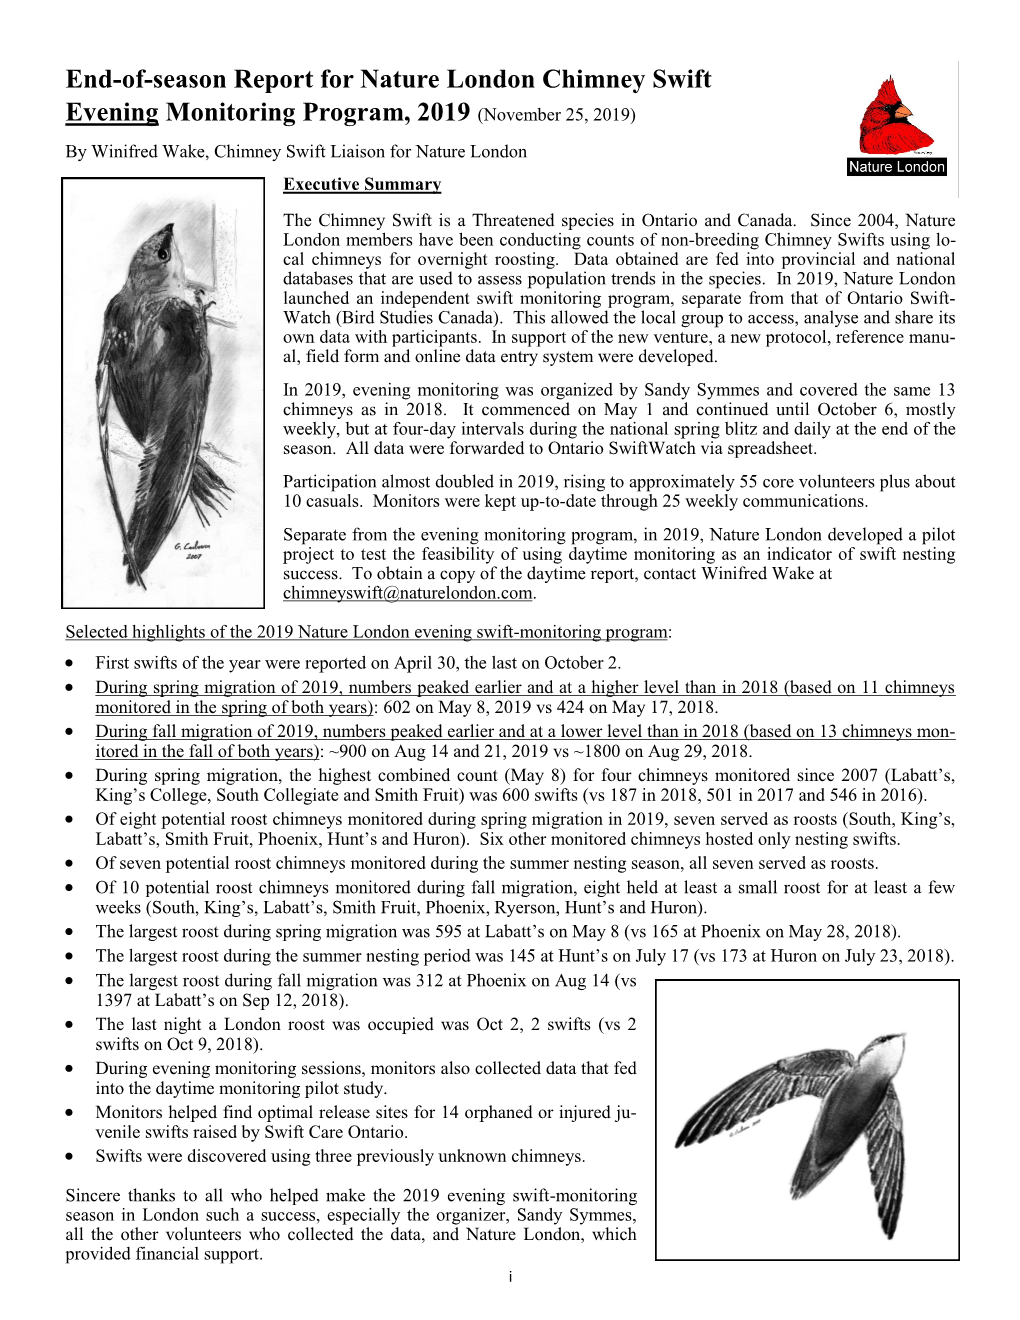 End-Of-Season Report for Nature London Chimney Swift Evening Monitoring Program, 2019 (November 25, 2019) by Winifred Wake, Chimney Swift Liaison for Nature London